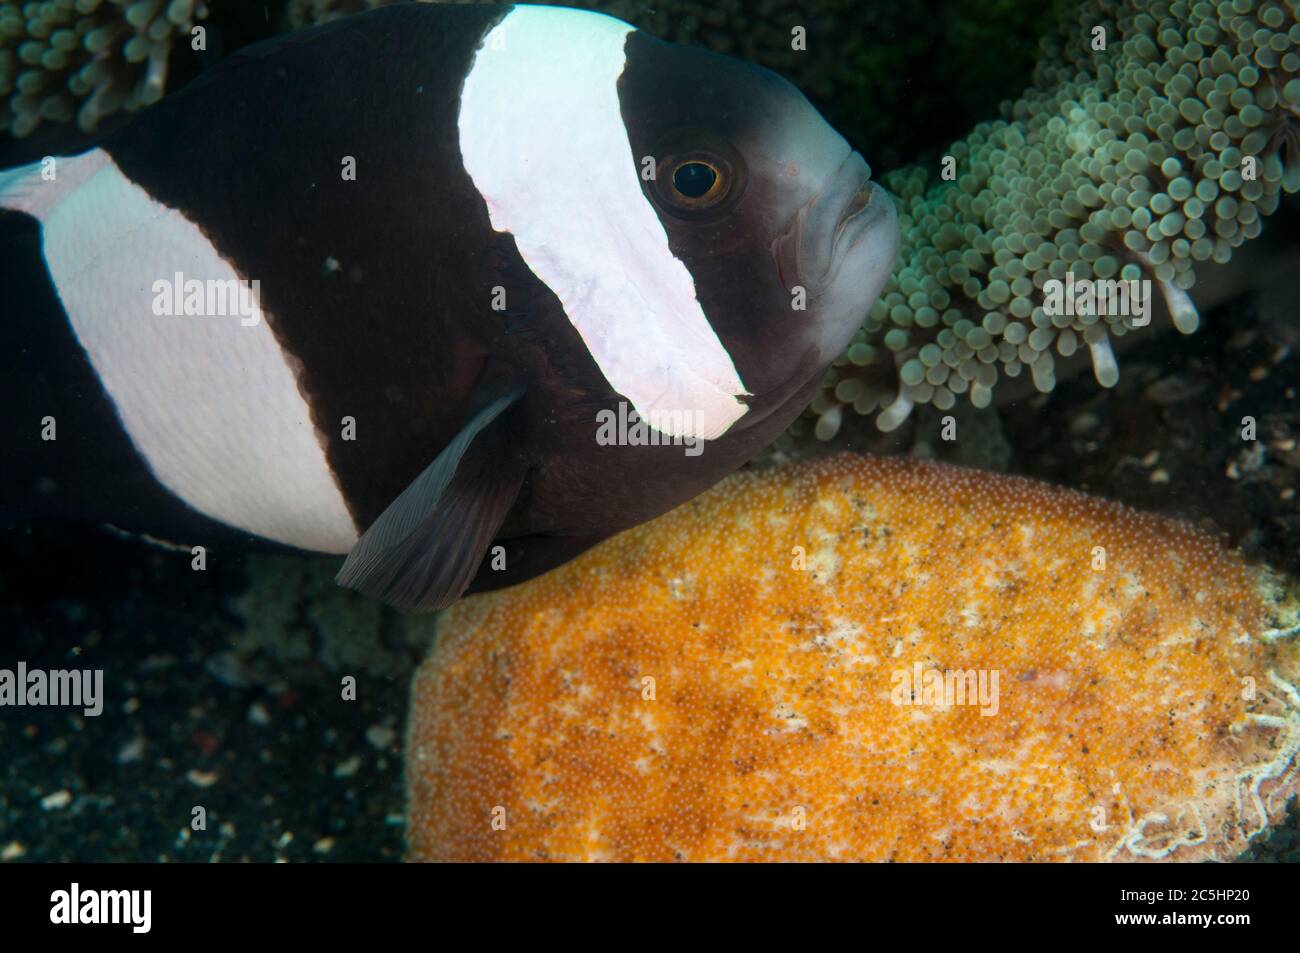 Saddleback Anemonefish, Amphiprion polymnus, protecting egg clutch by anemone, Hairball dive site, Lembeh Straits, Sulawesi, Indonesia Stock Photo